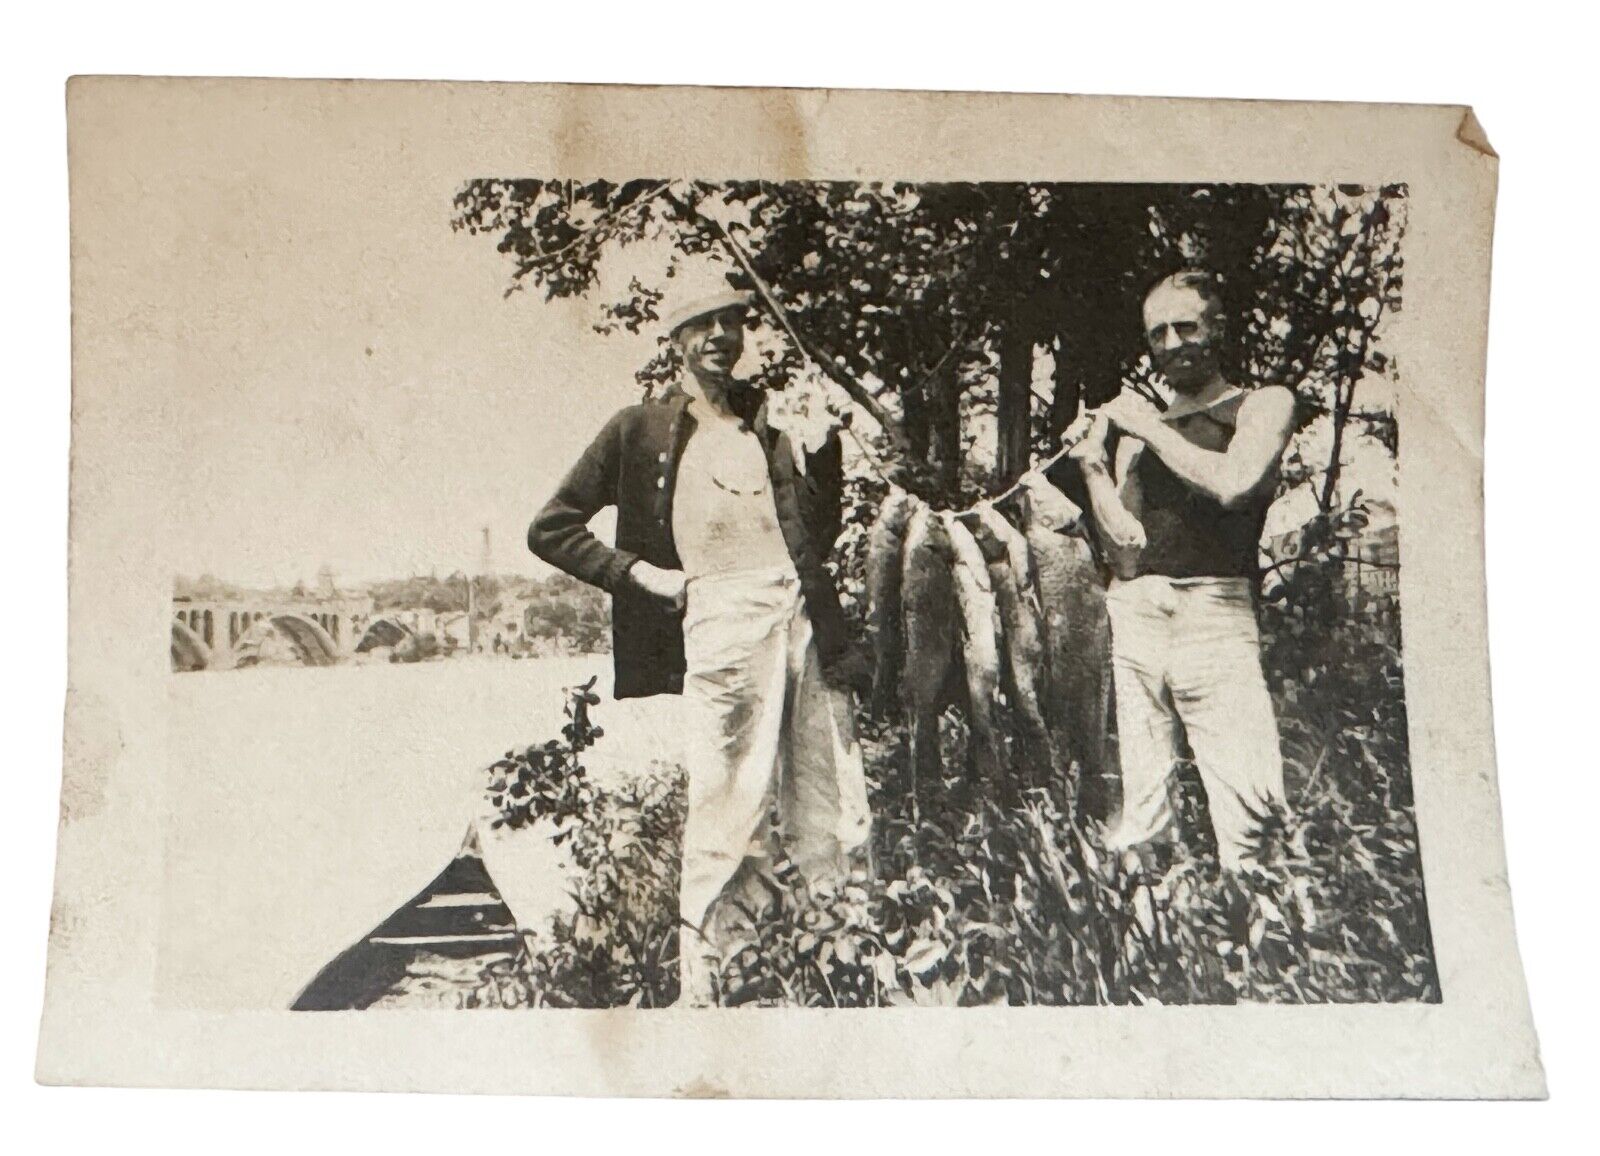 C1900s Photo Men Row Boat Holding Bunch Of Catfish They Caught